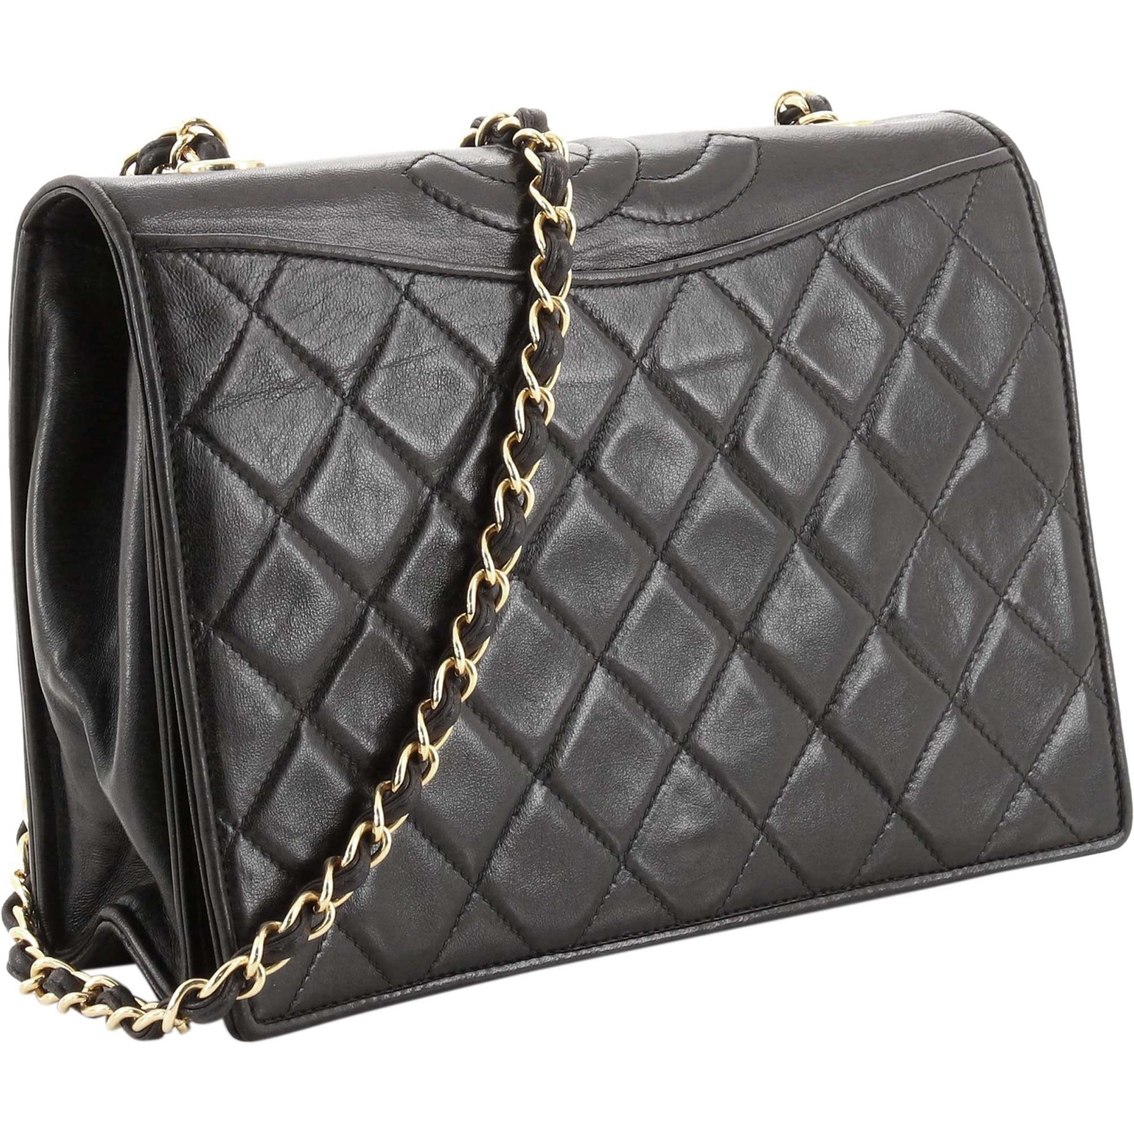 Chanel Vintage Black Quilted Lambskin Leather Cc Full Medium Flap